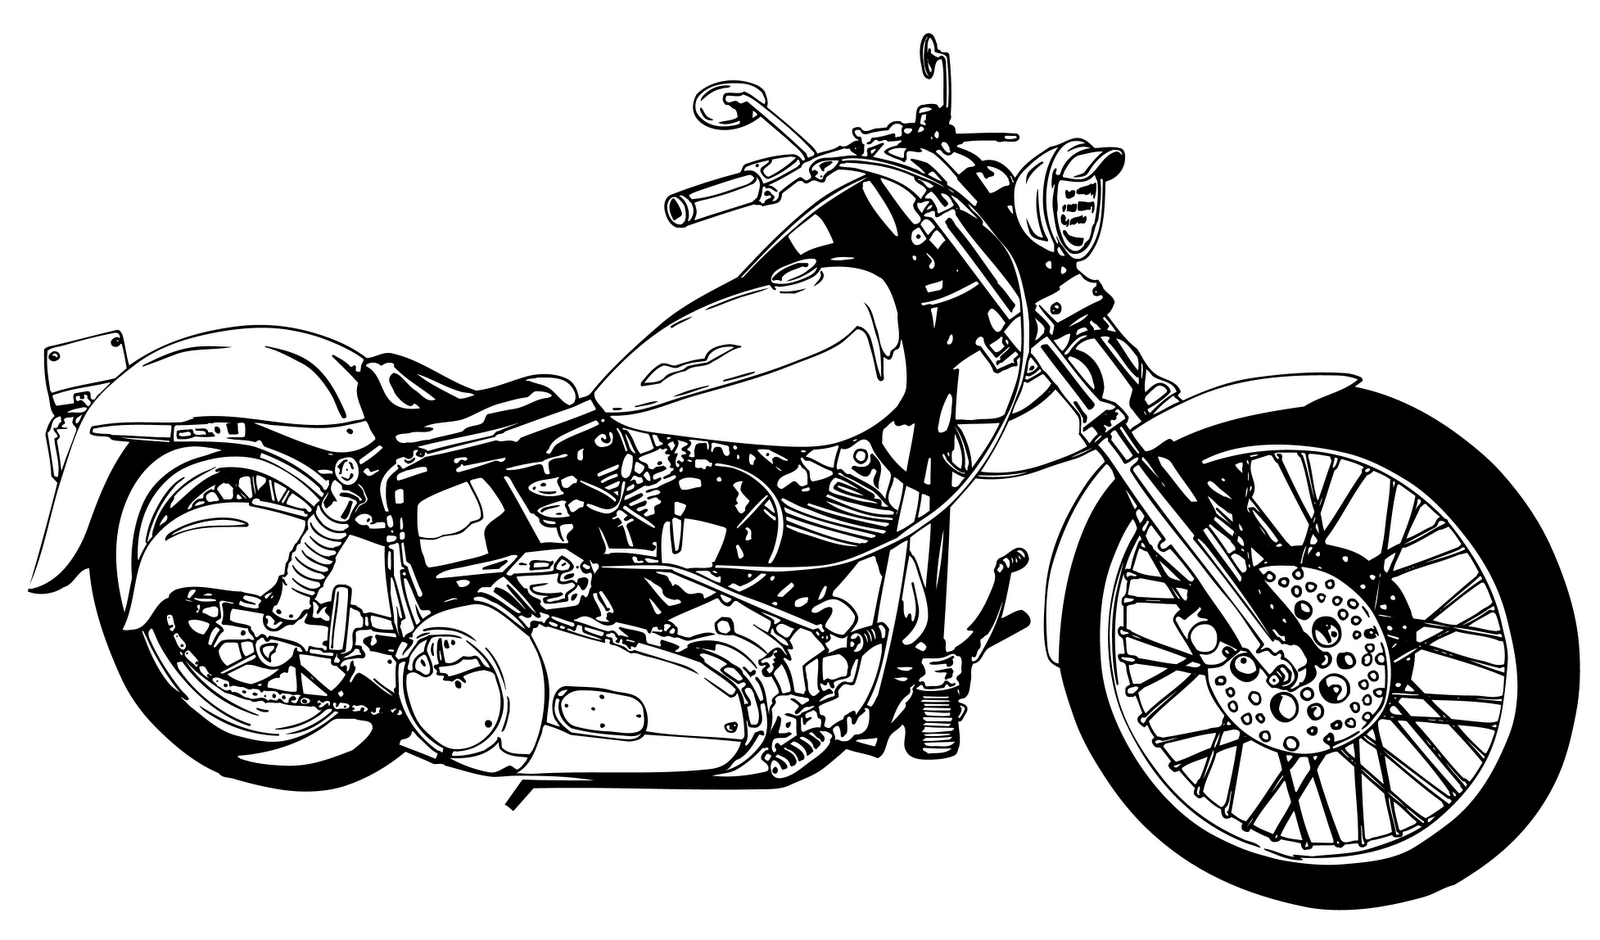 Motorcycle Image Clipart 